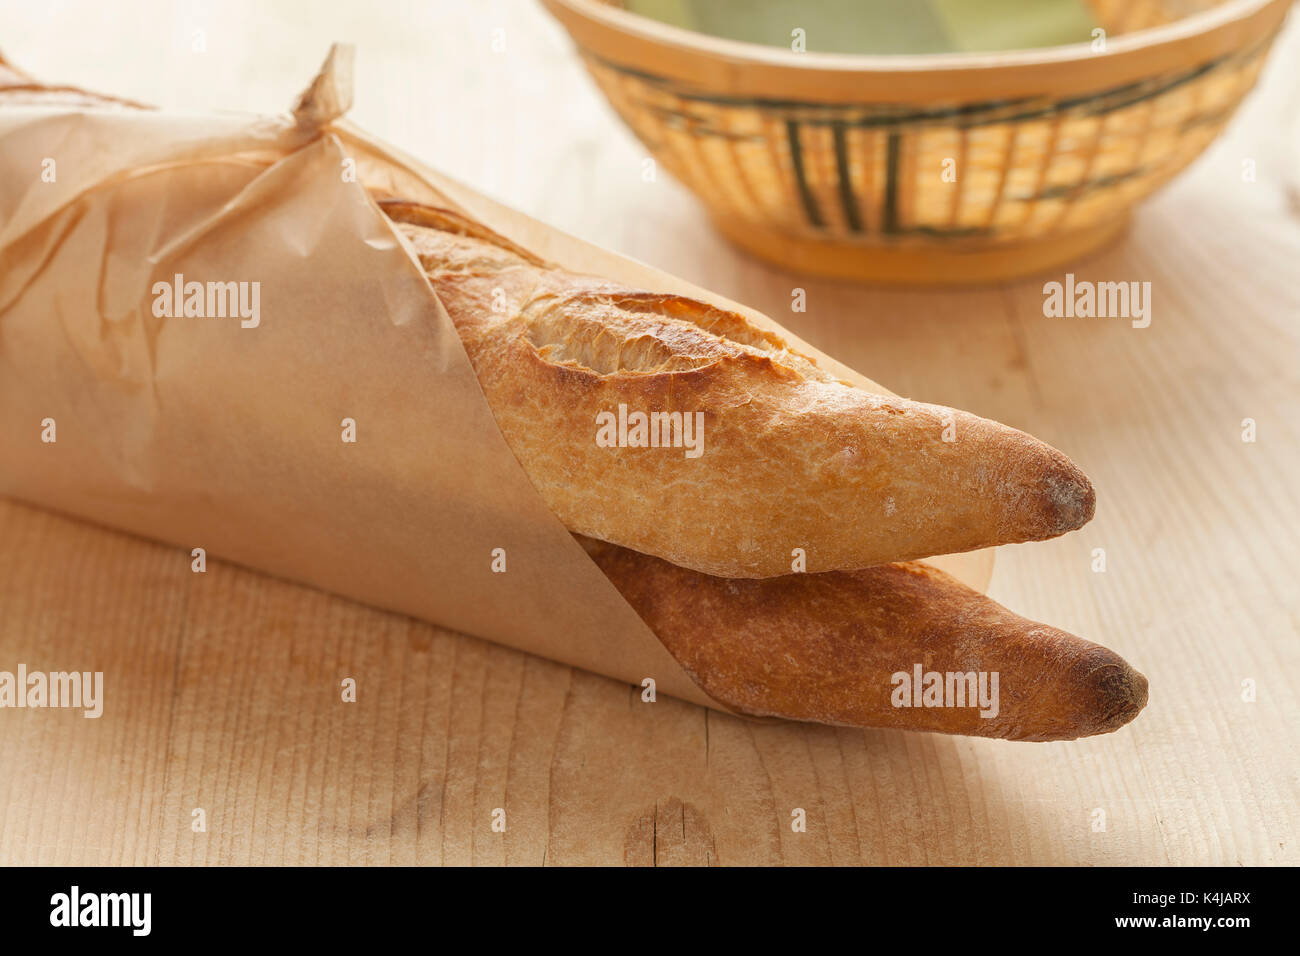 Two French baguettes parisienne wrapped in paper Stock Photo